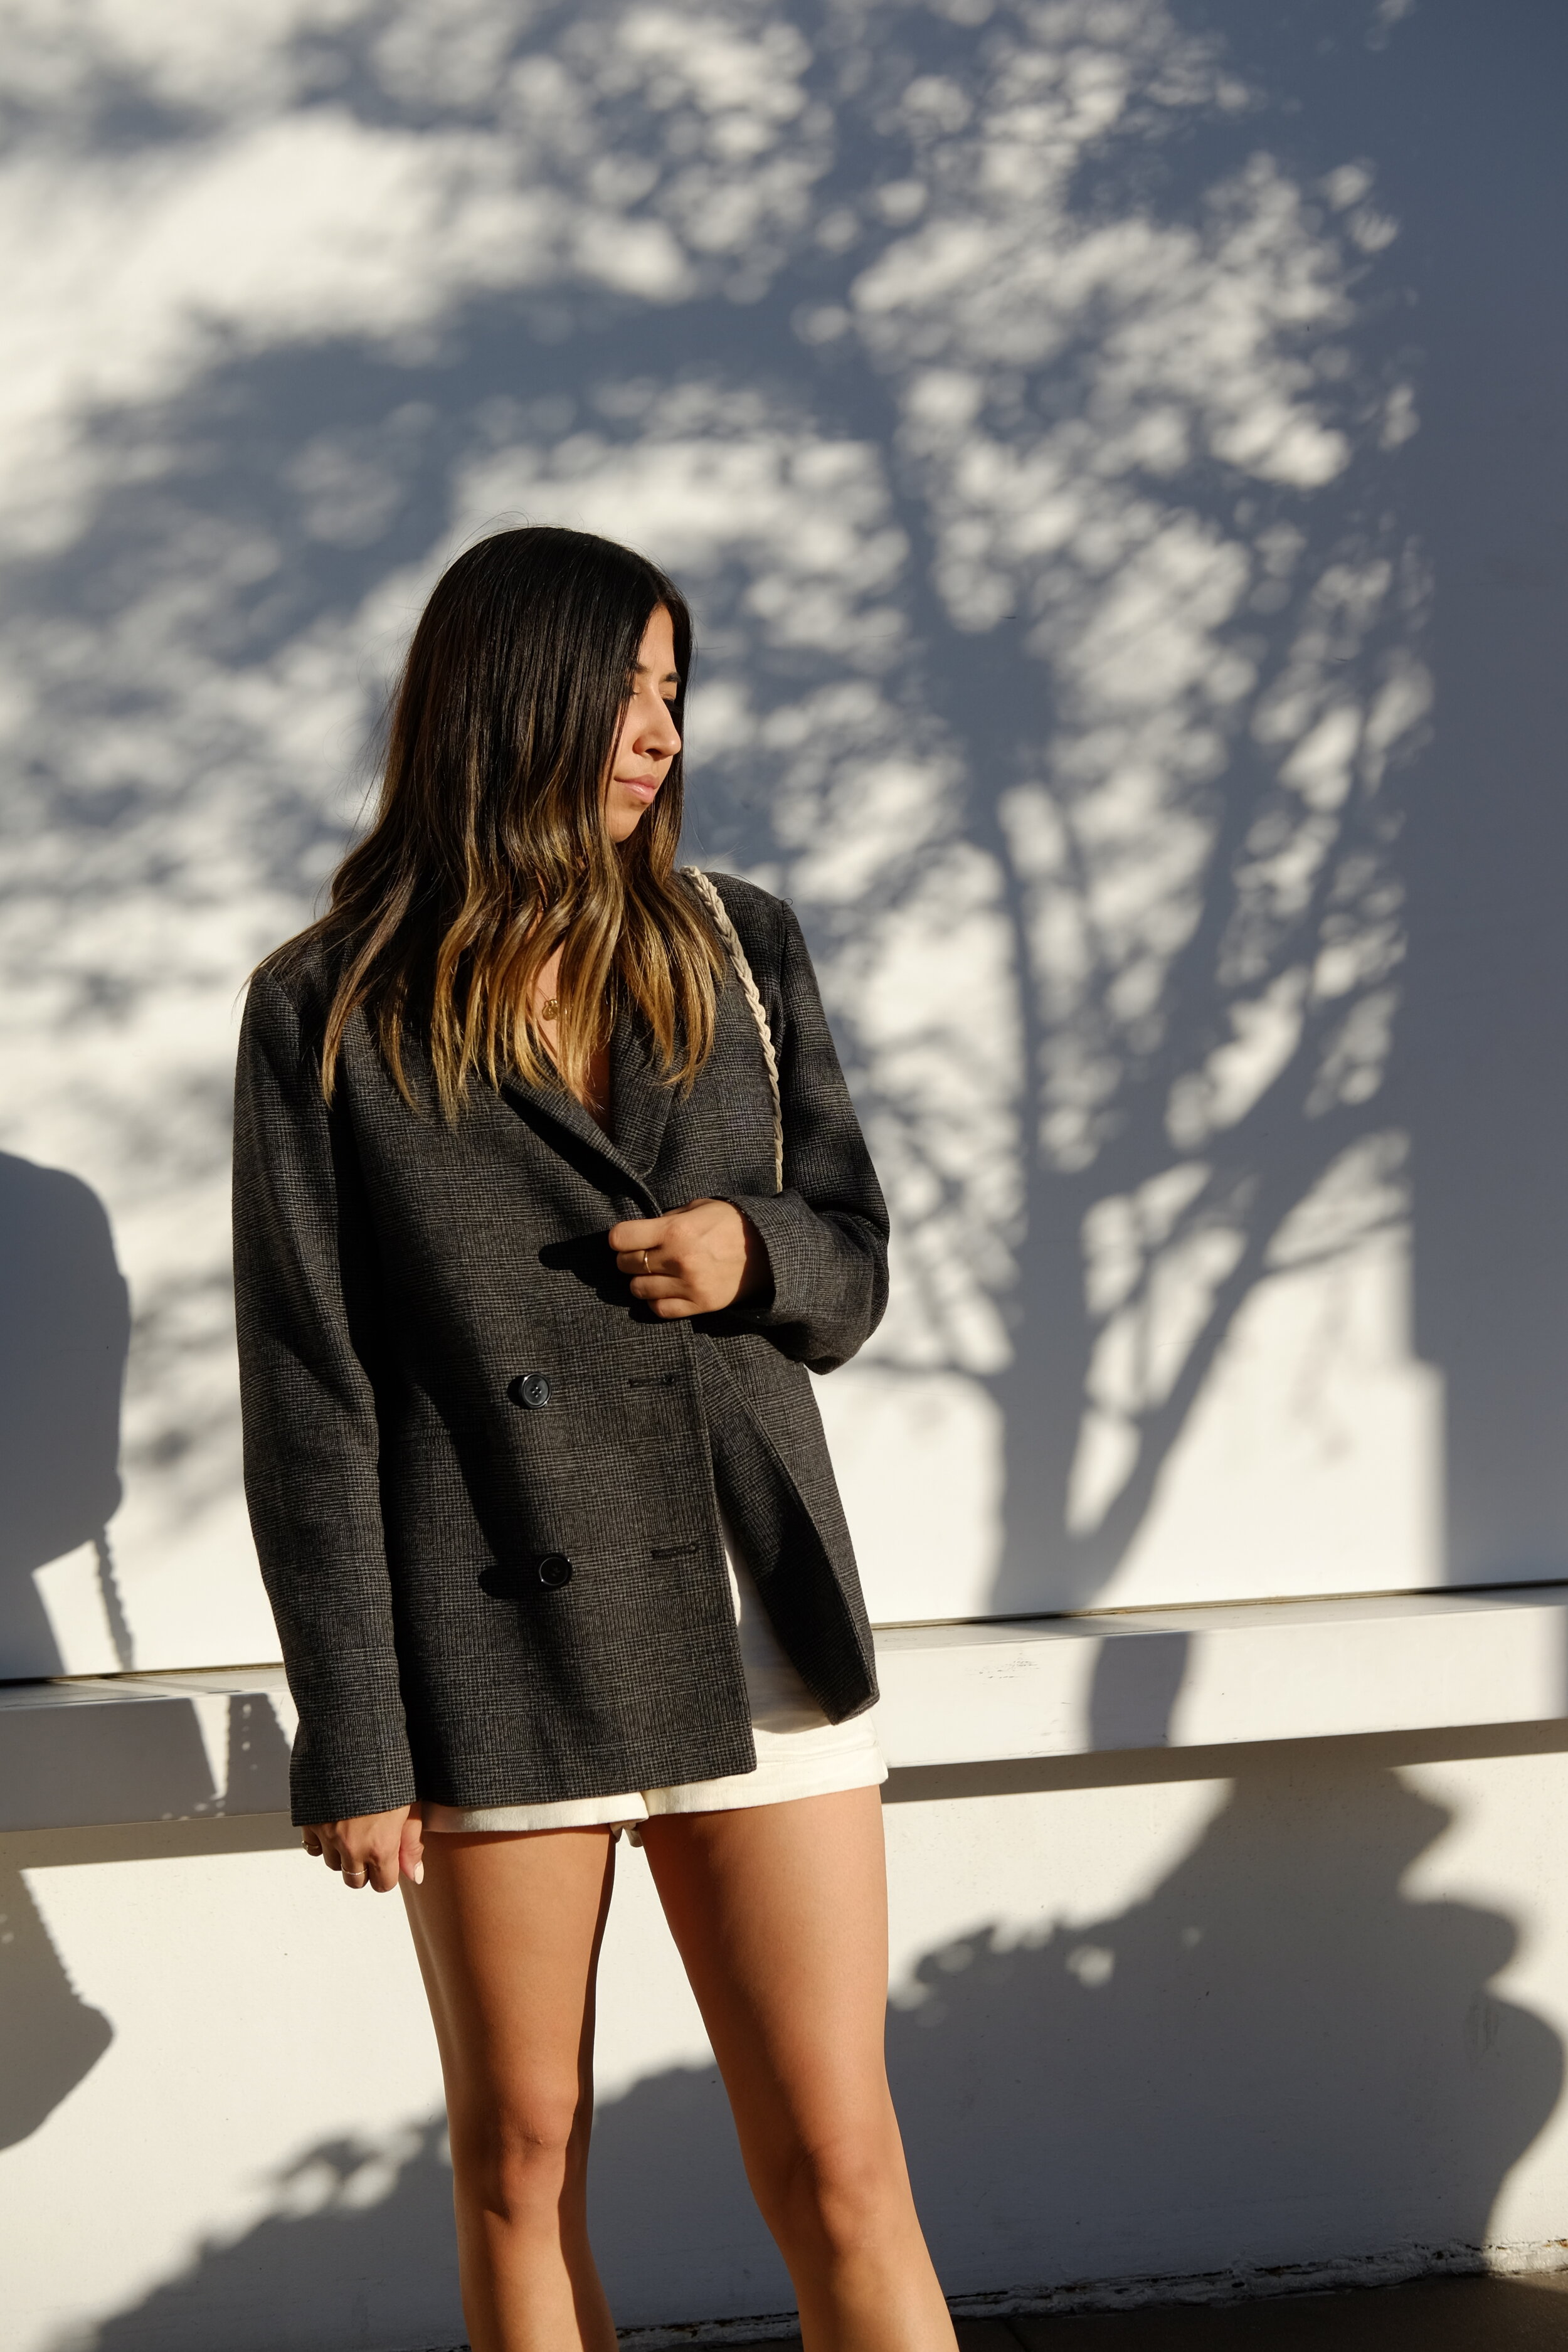 One Fall Staple for Your Wardrobe: The Oversized Blazer — Love